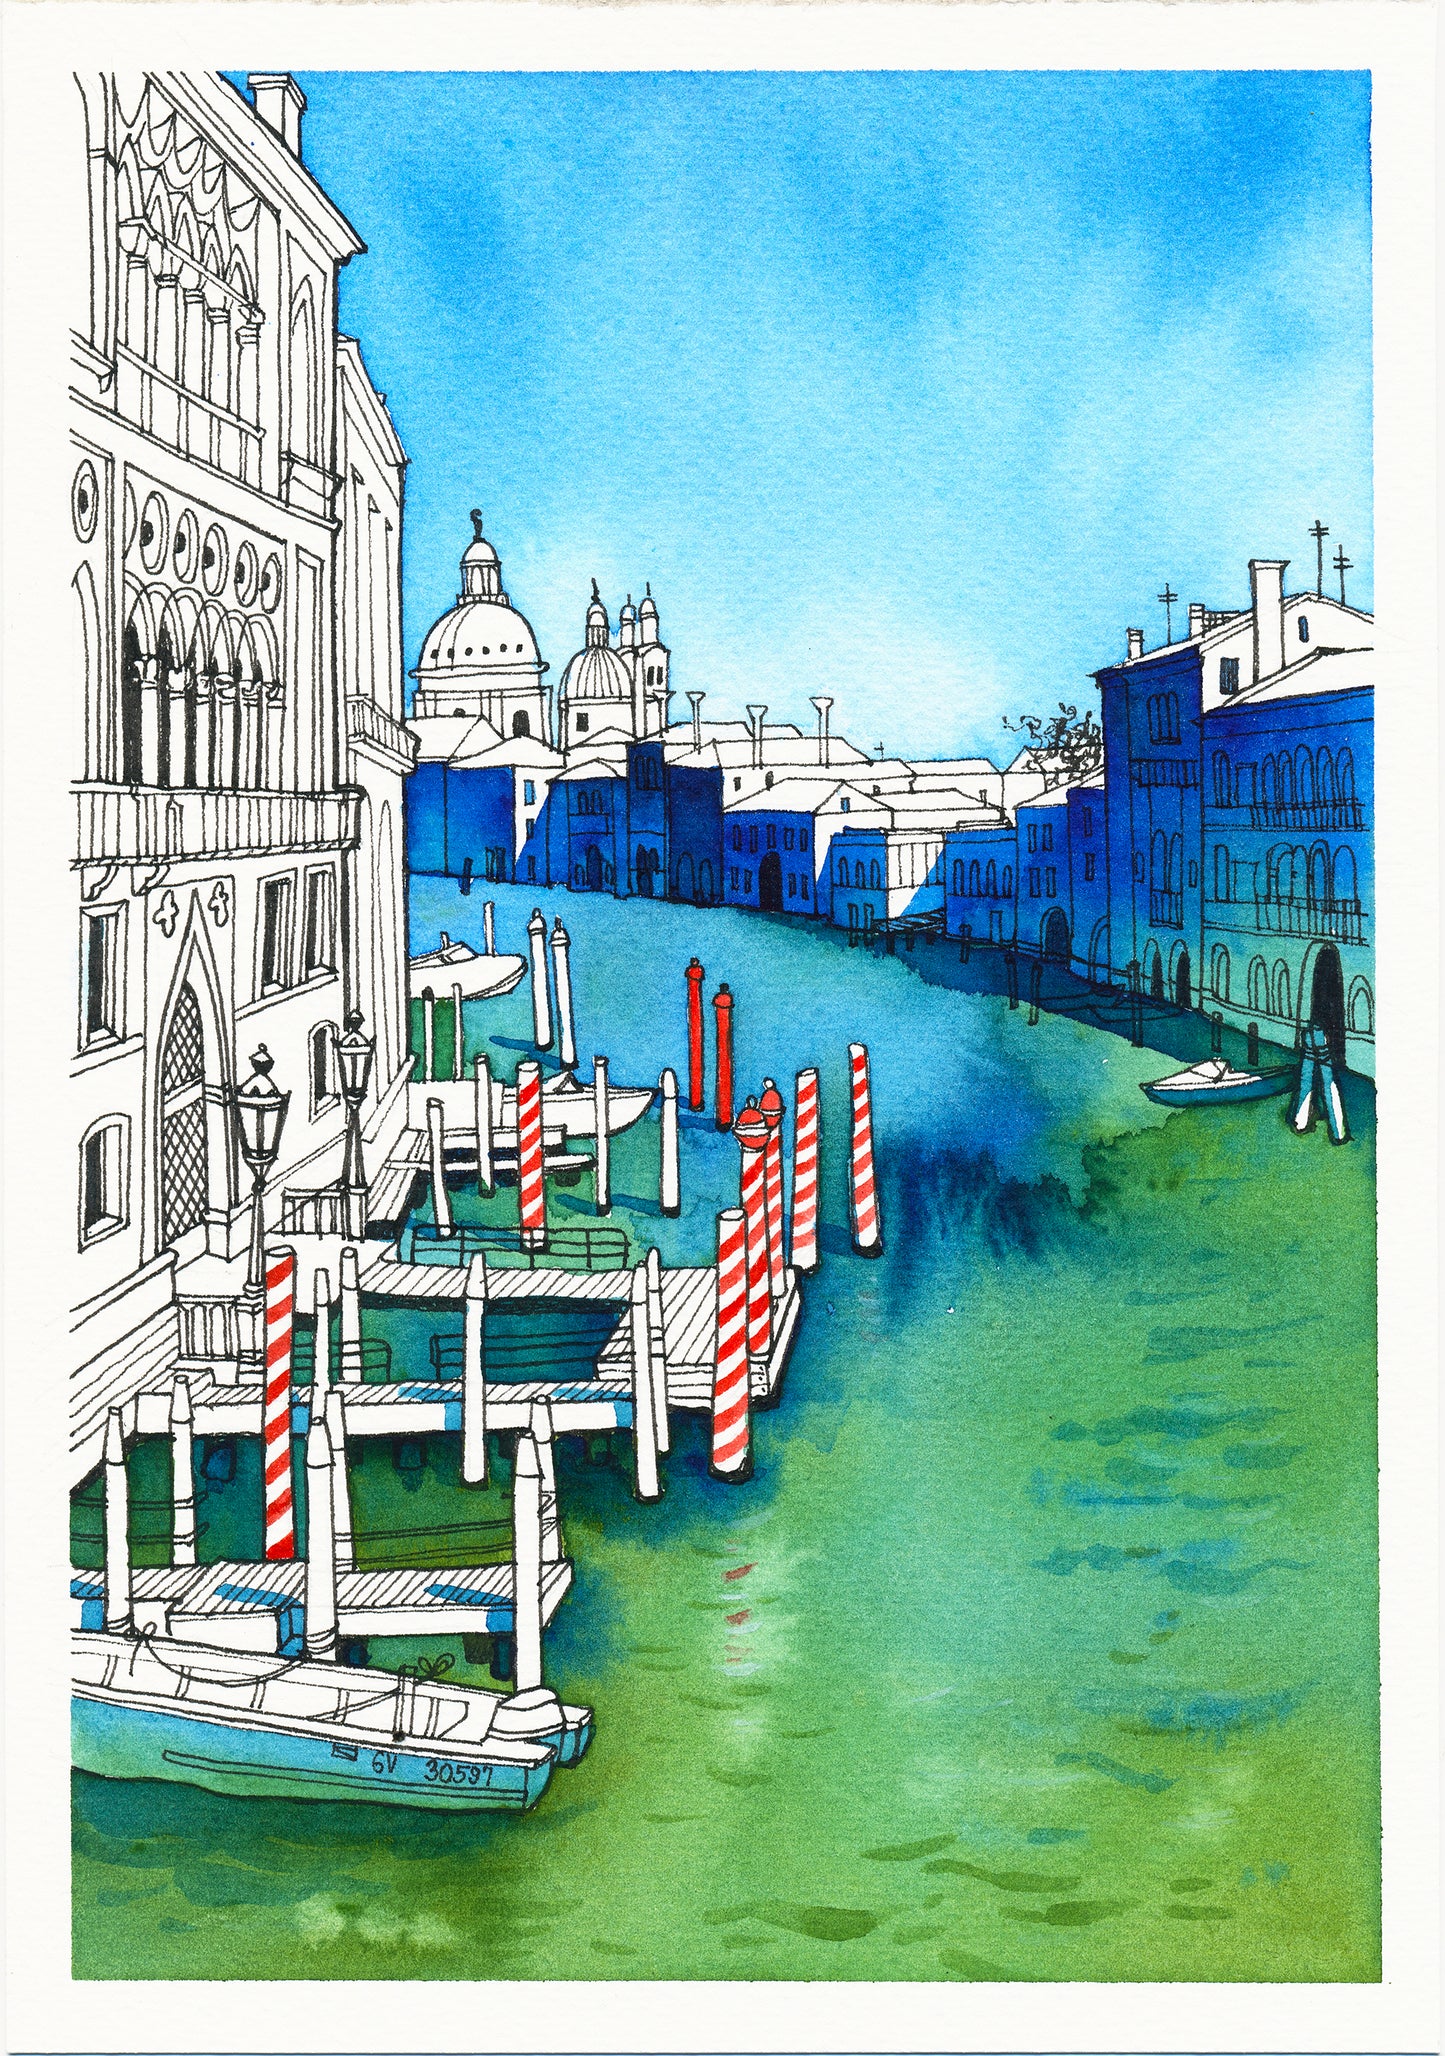 VENICE GRAND CANAL Watercolor Painting Giclée Print #A10